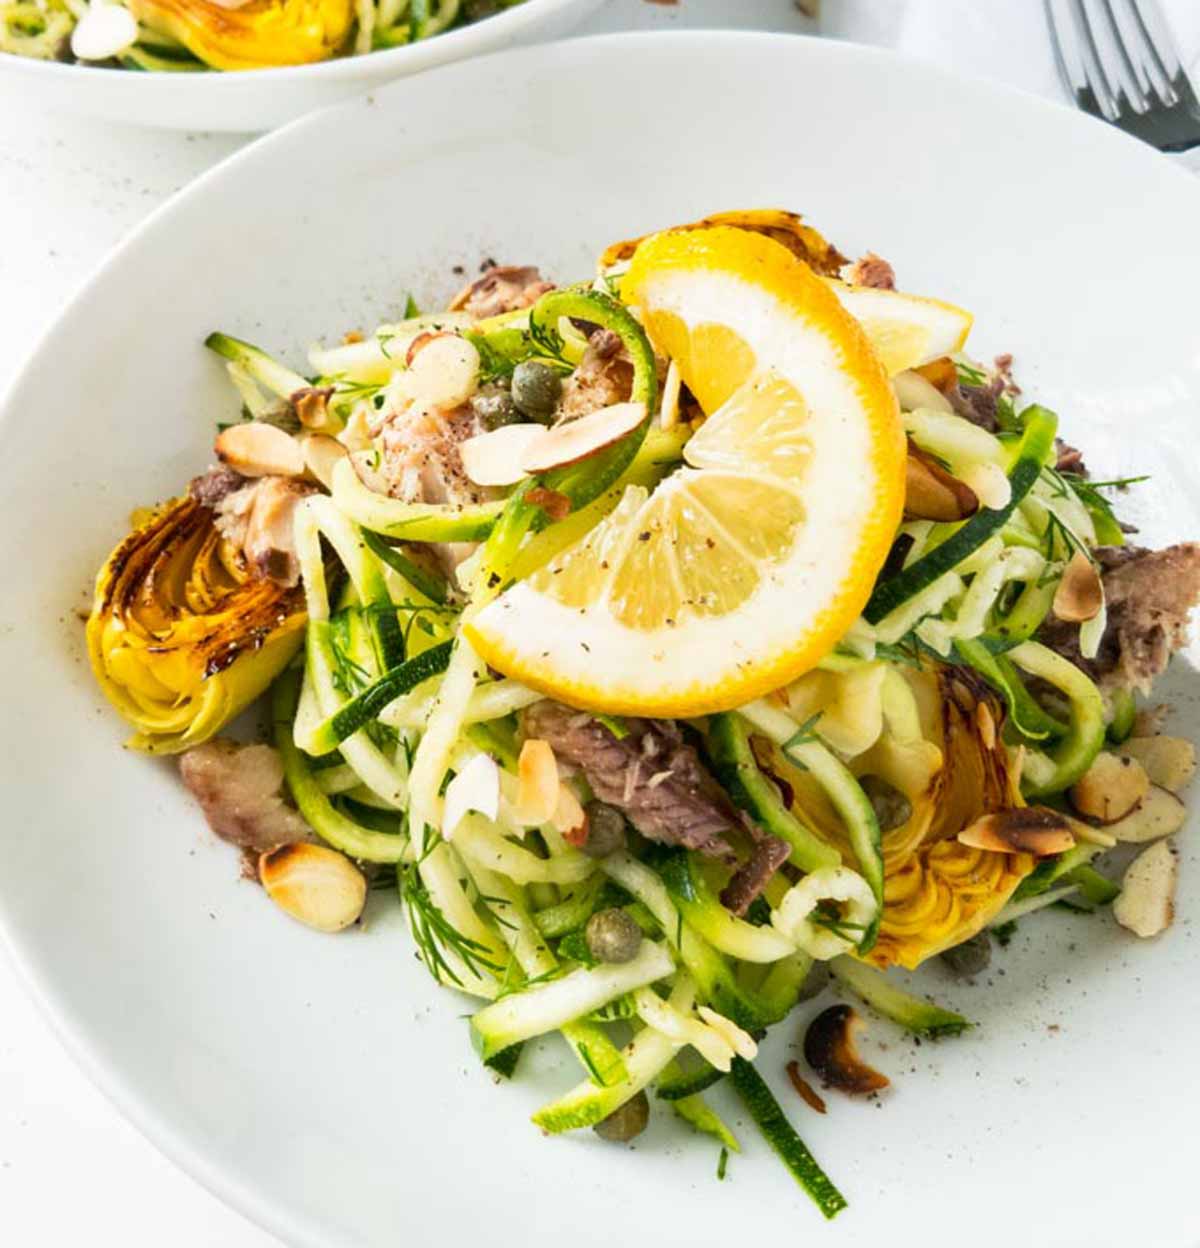 Zucchini noodles in a bowl with lemon.